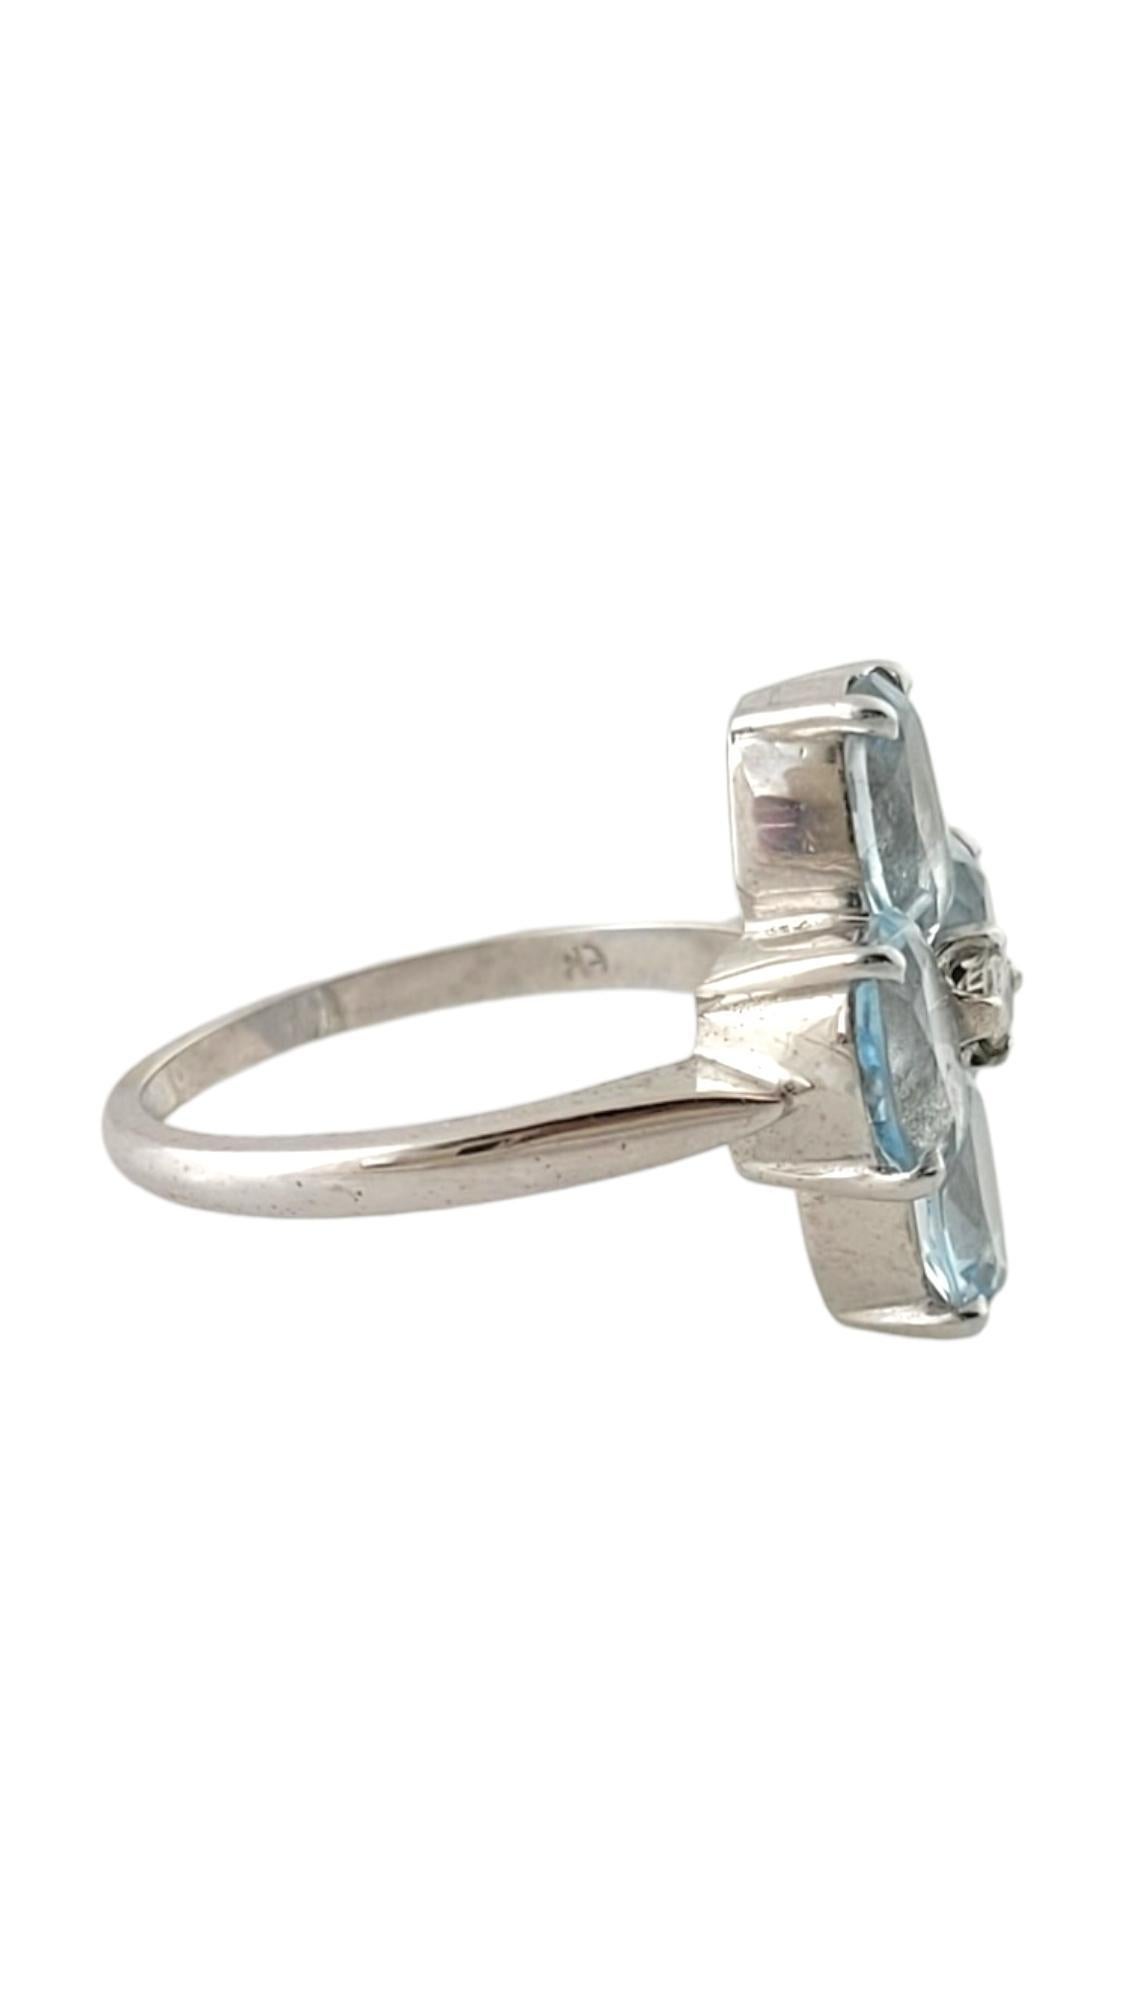 14K White Gold Diamond and Aquamarine Clover Style Ring Size 6.5

This gorgeous 14K white gold ring features 4 oval shaped cut aquamarine stones with a sparkling round brilliant cut diamond in the center!

Aquamarine carat weight approx. 2.36